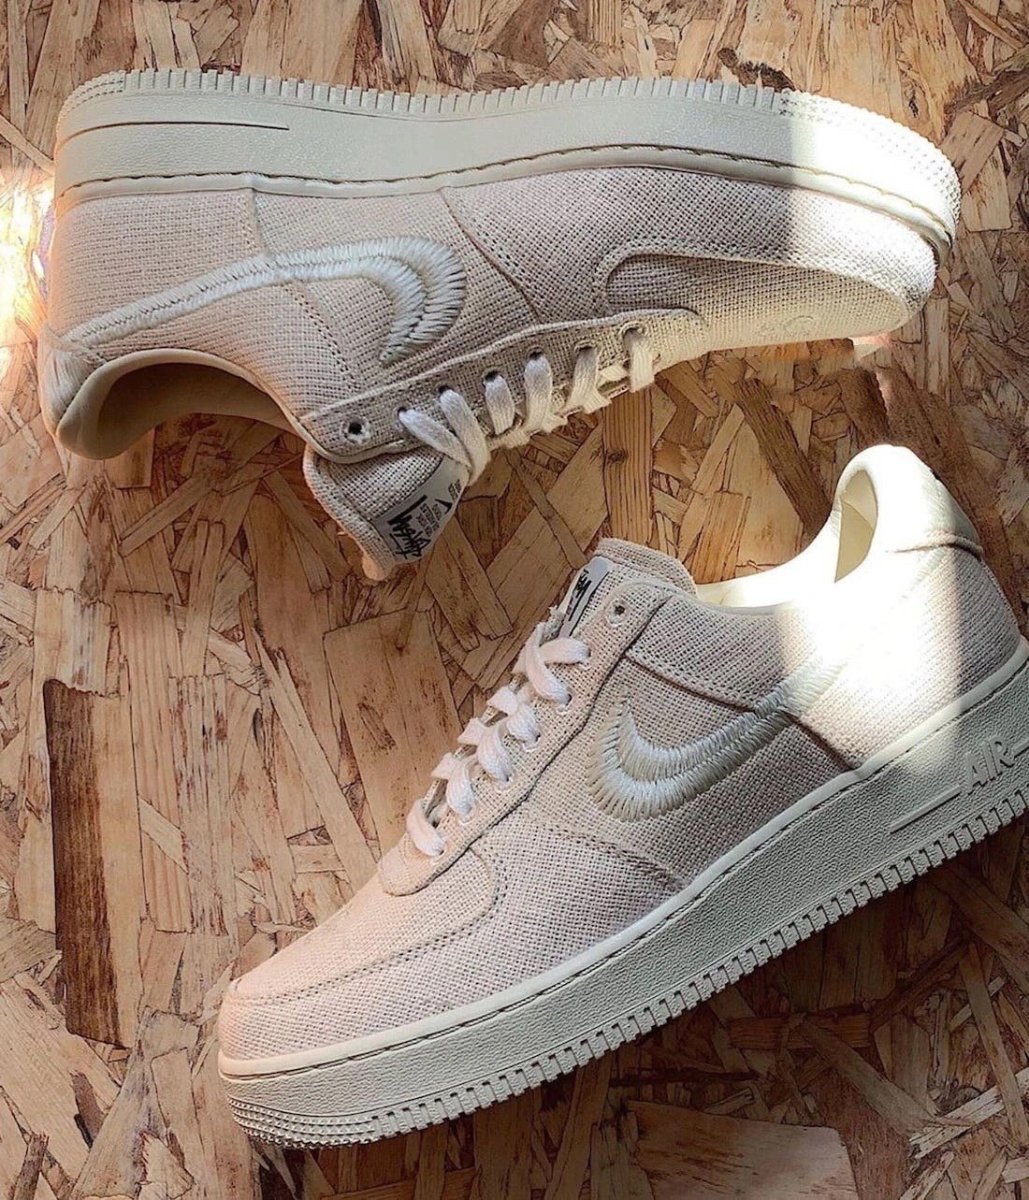 NIKE AIR FORCE 1 x STUSSY FOSSIL - Prime Reps